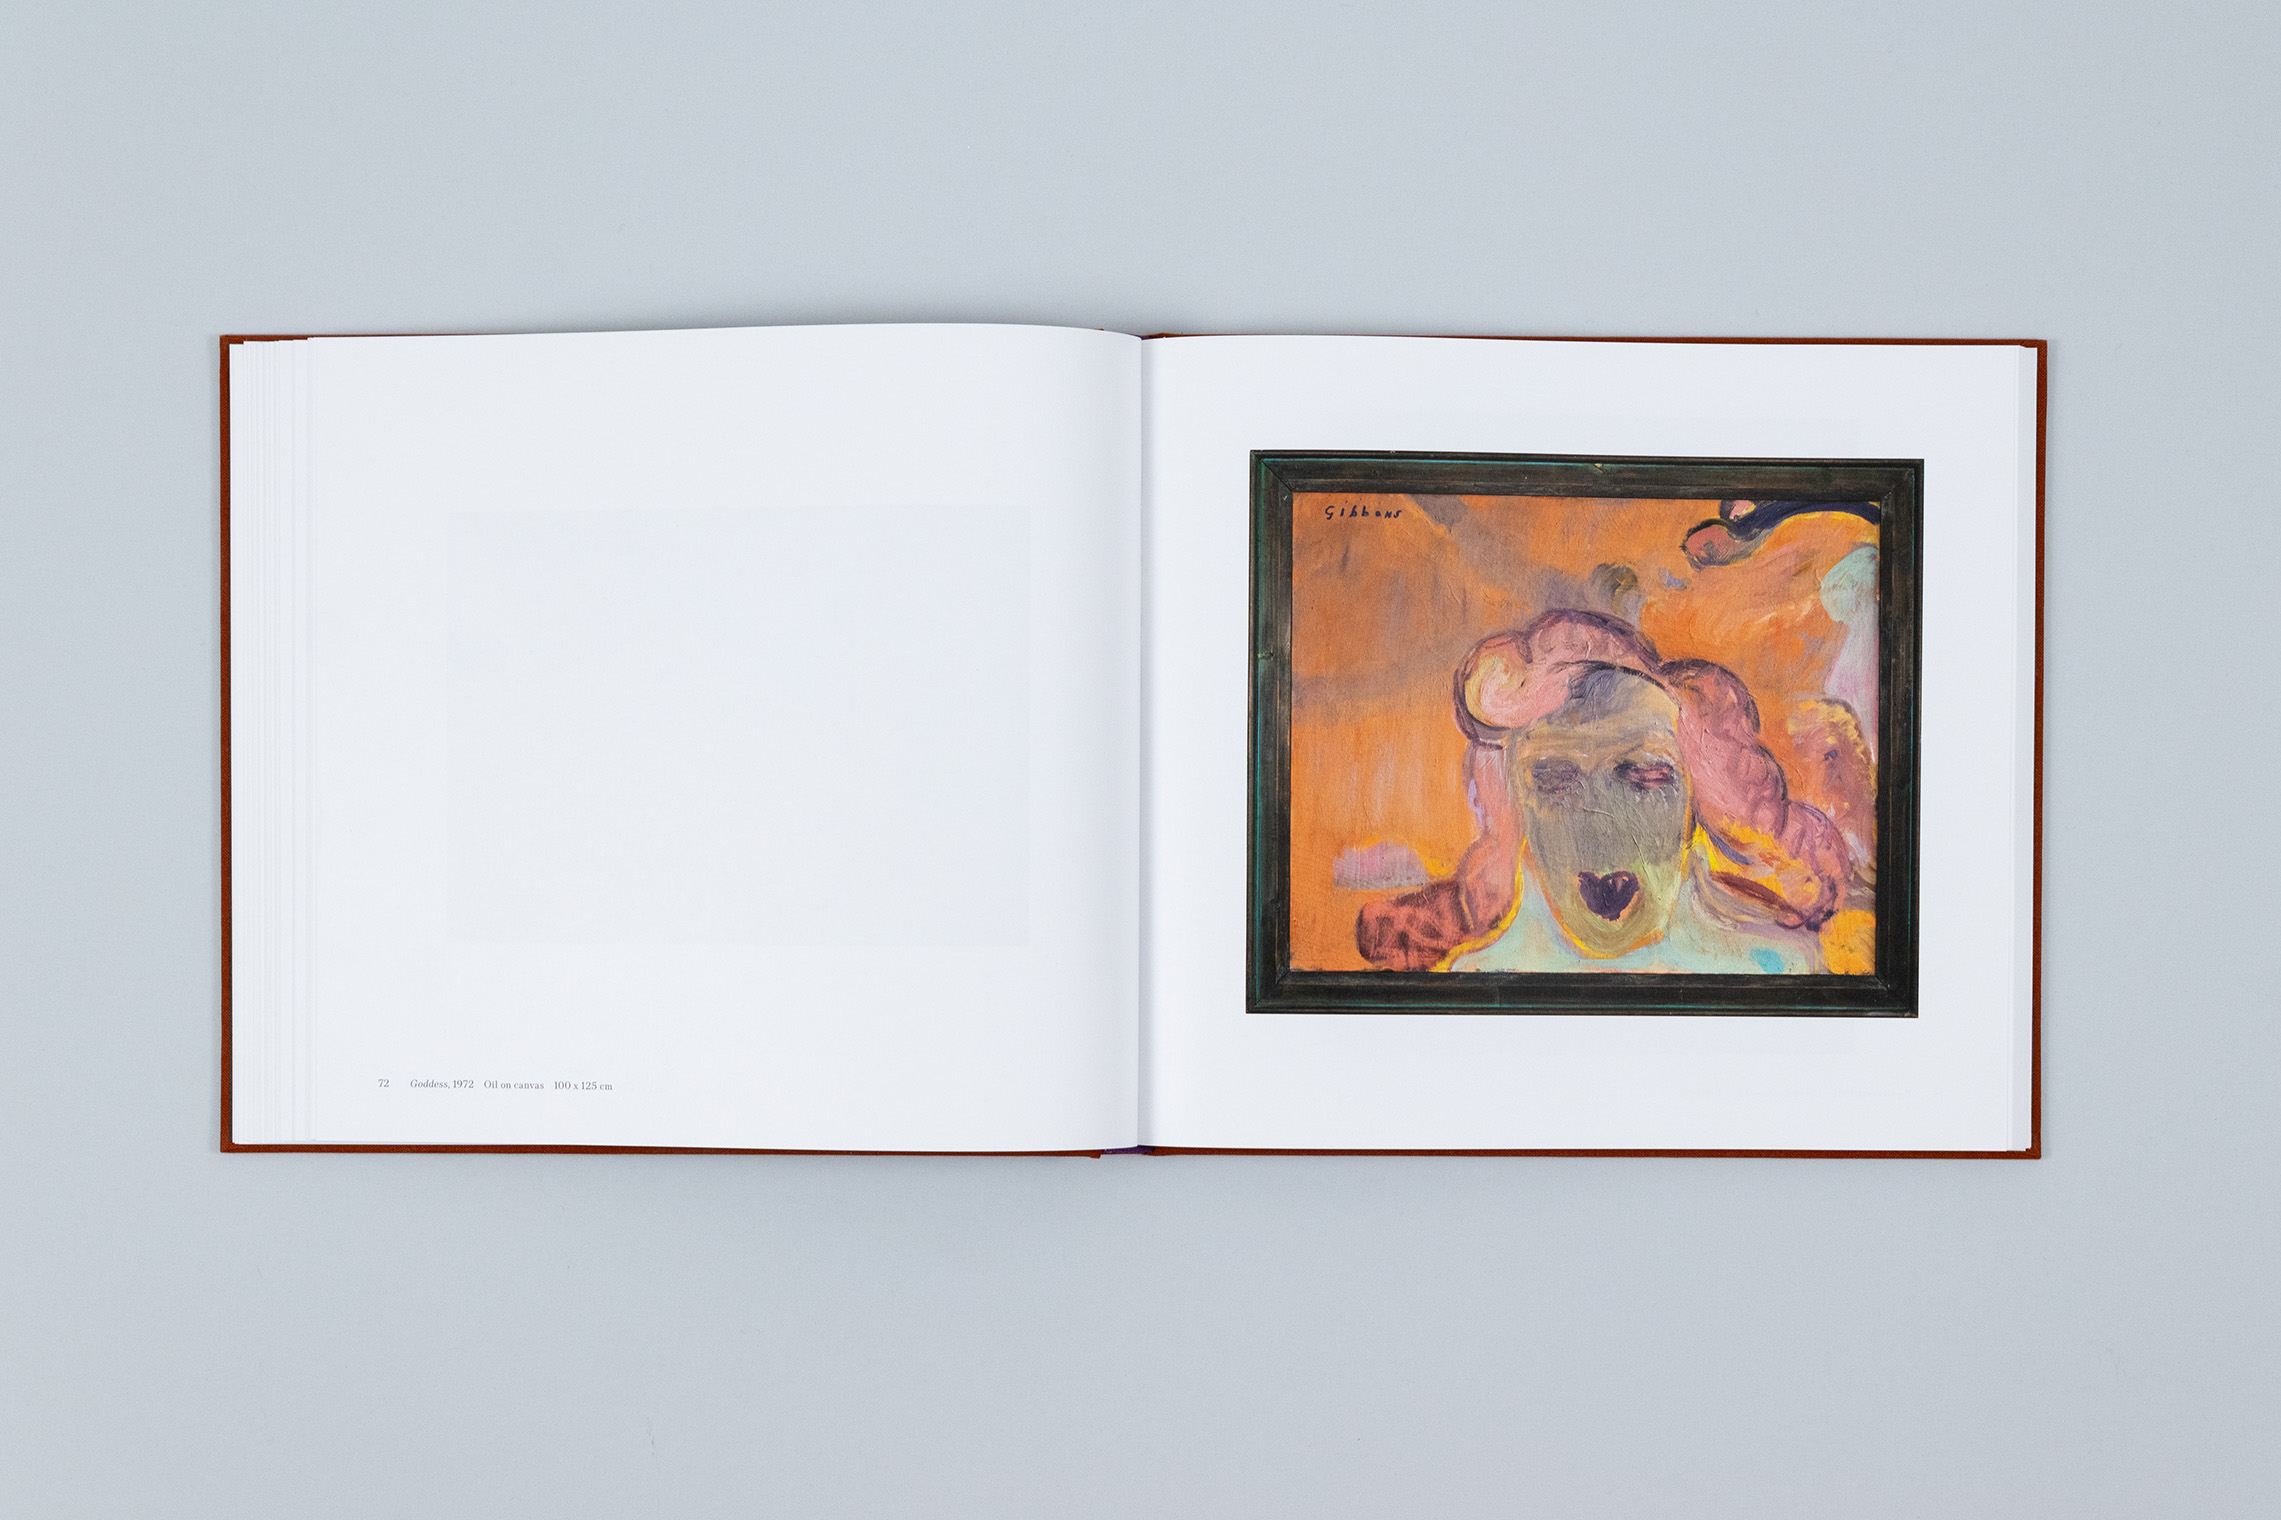 Carole Gibbons monograph spread with the painting Godess on the right page, an orange and red-toned close-up of a female visage